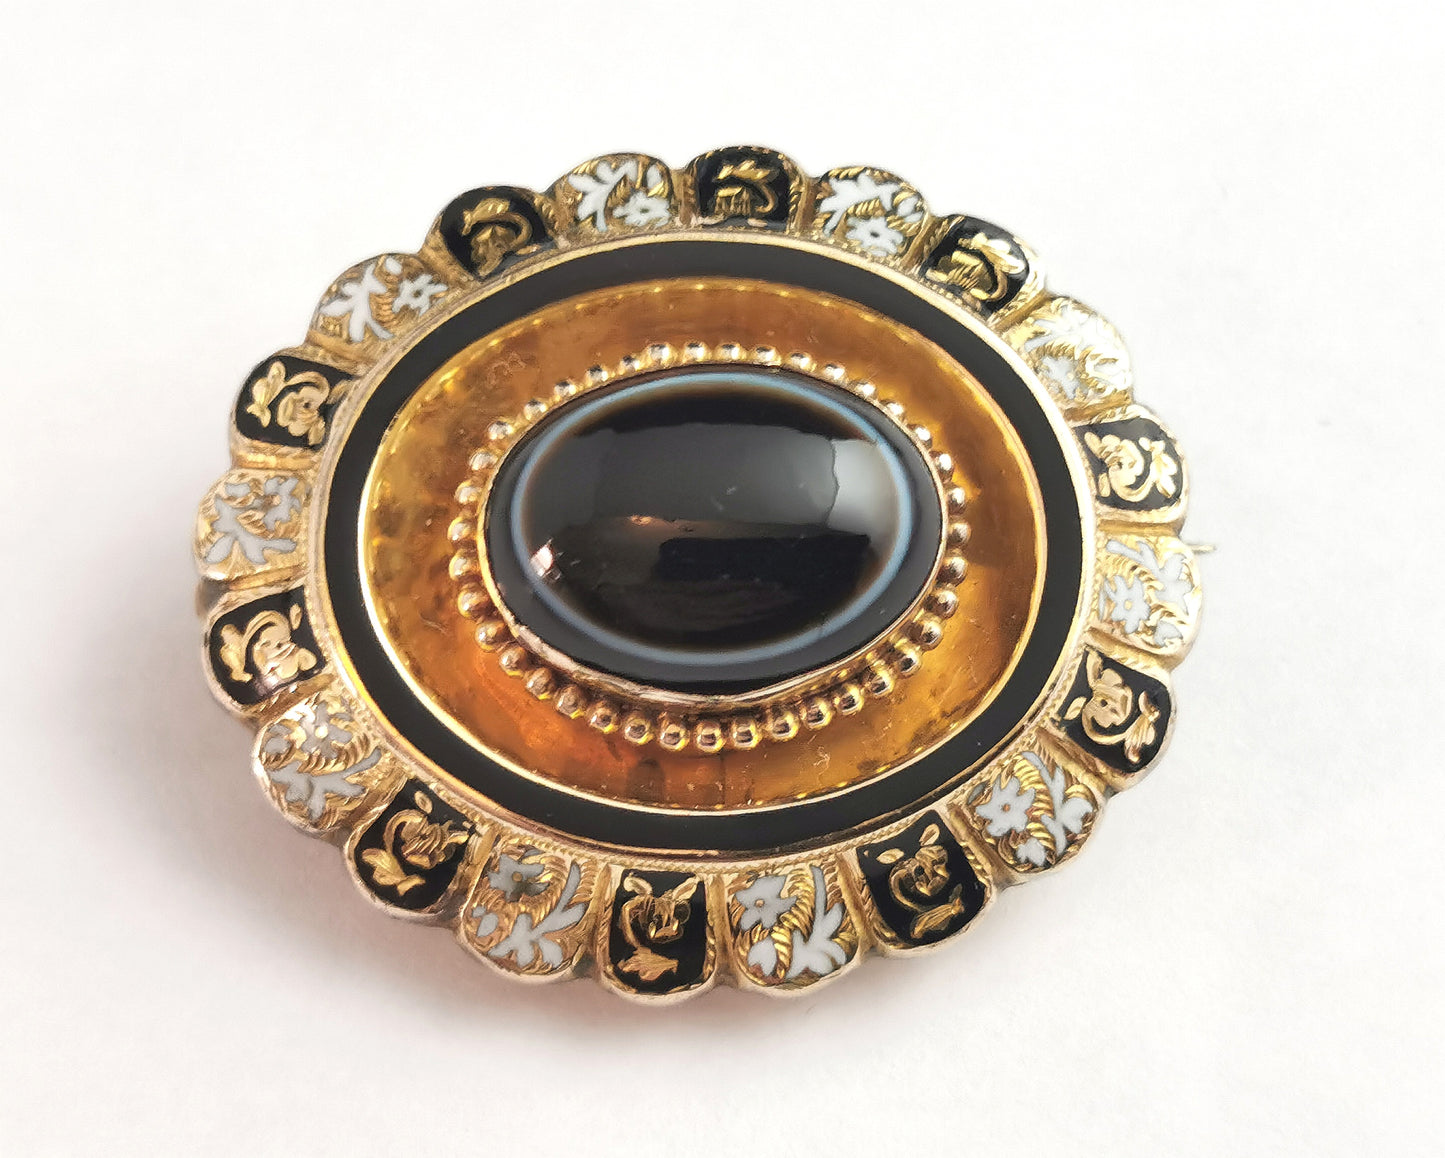 Antique Banded agate mourning brooch, 9ct gold, hairwork, Black and White enamel, Victorian